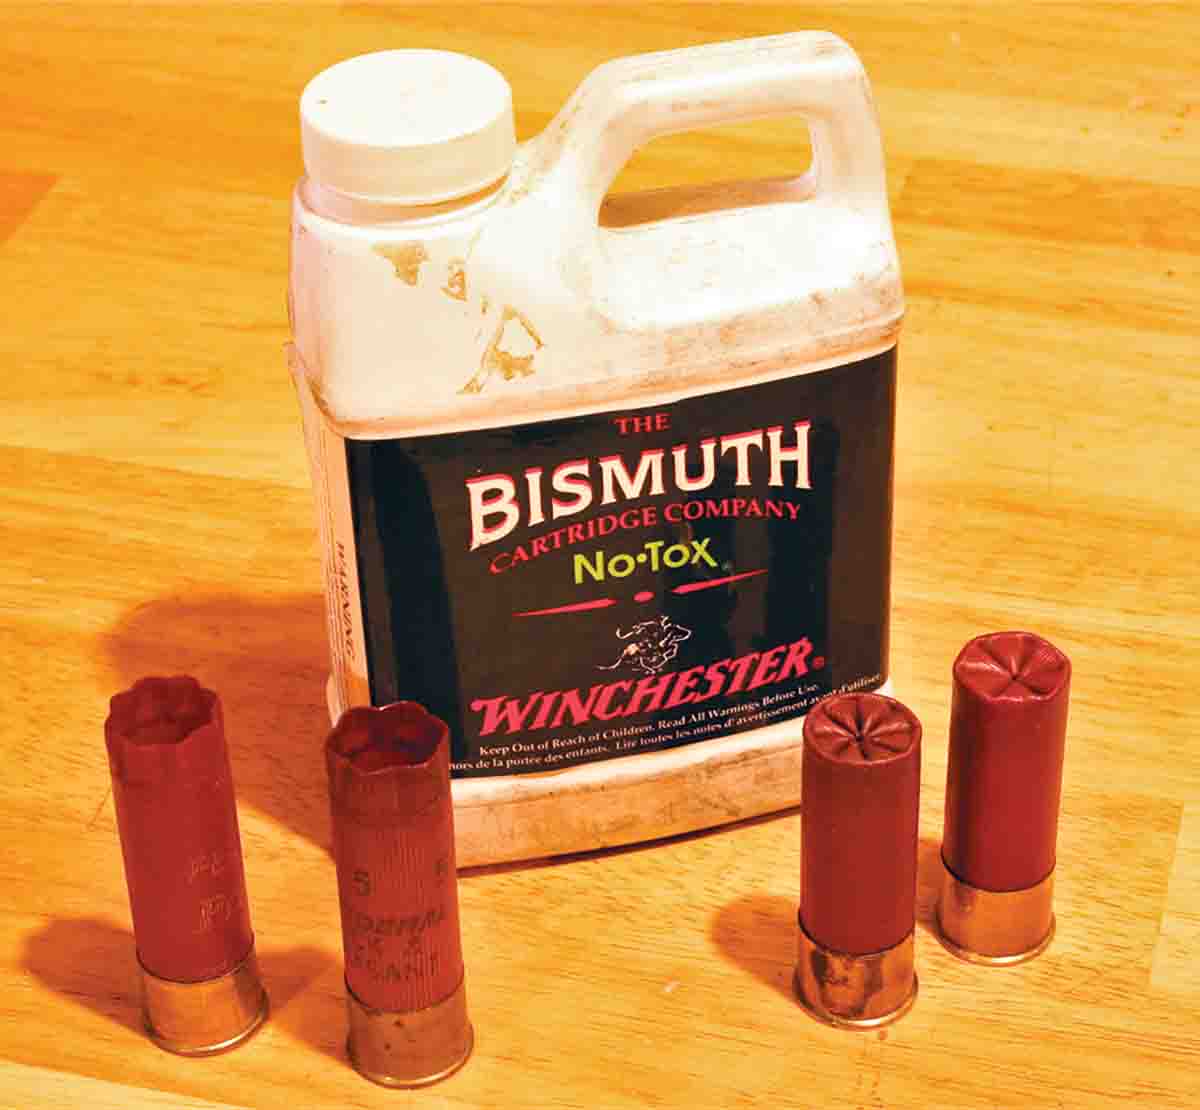 John has been using Bismuth shot since the late 1990s, and stocked up during the period when Winchester sold both loaded ammunition and shot.